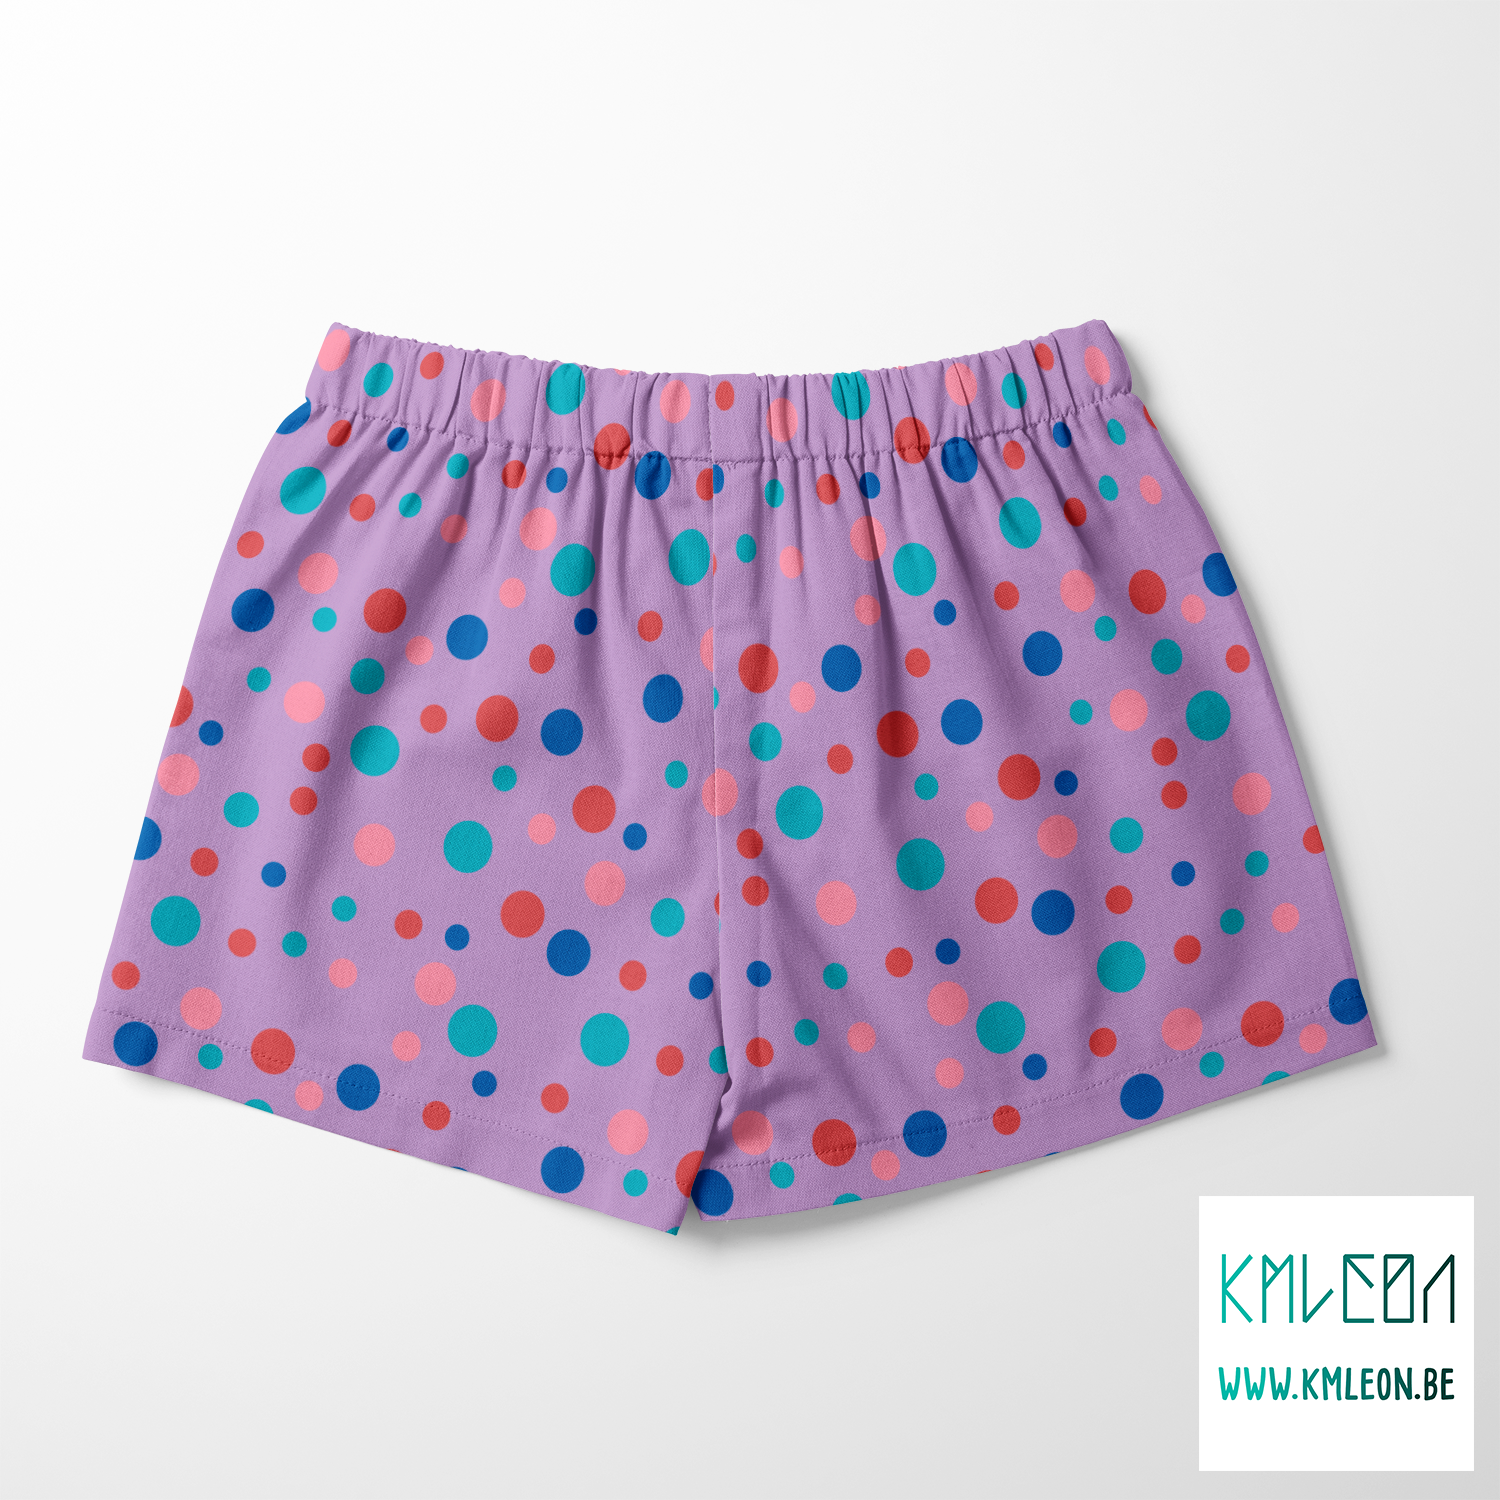 Random pink, red, blue and teal polka dots fabric